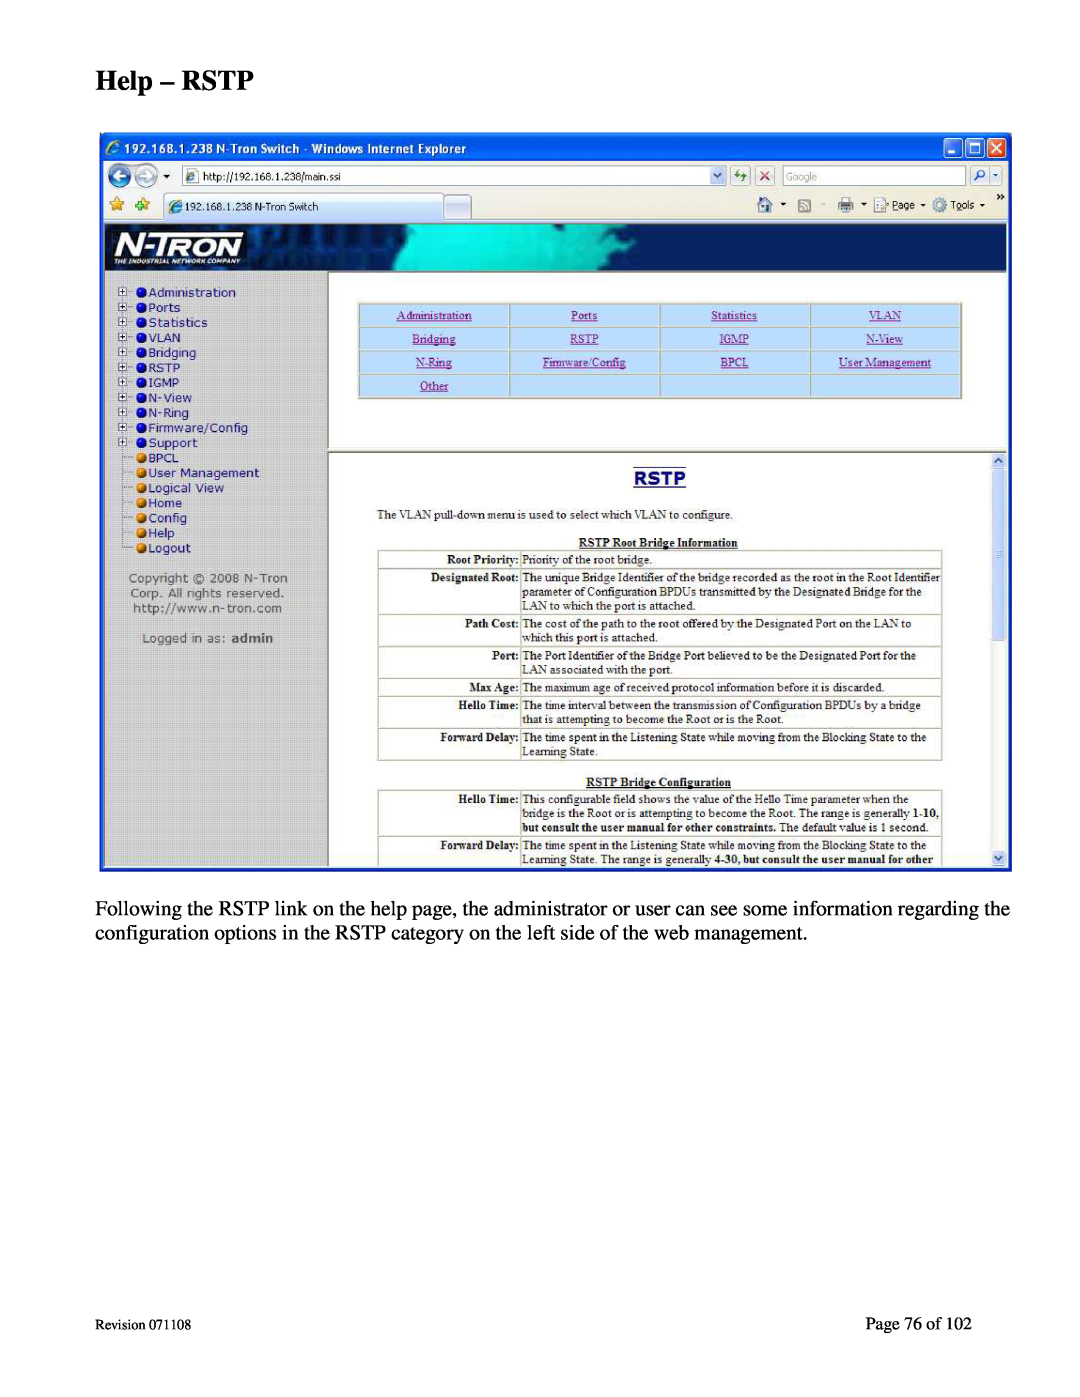 N-Tron 708M12 user manual Help - RSTP, Page 76 of, Revision 